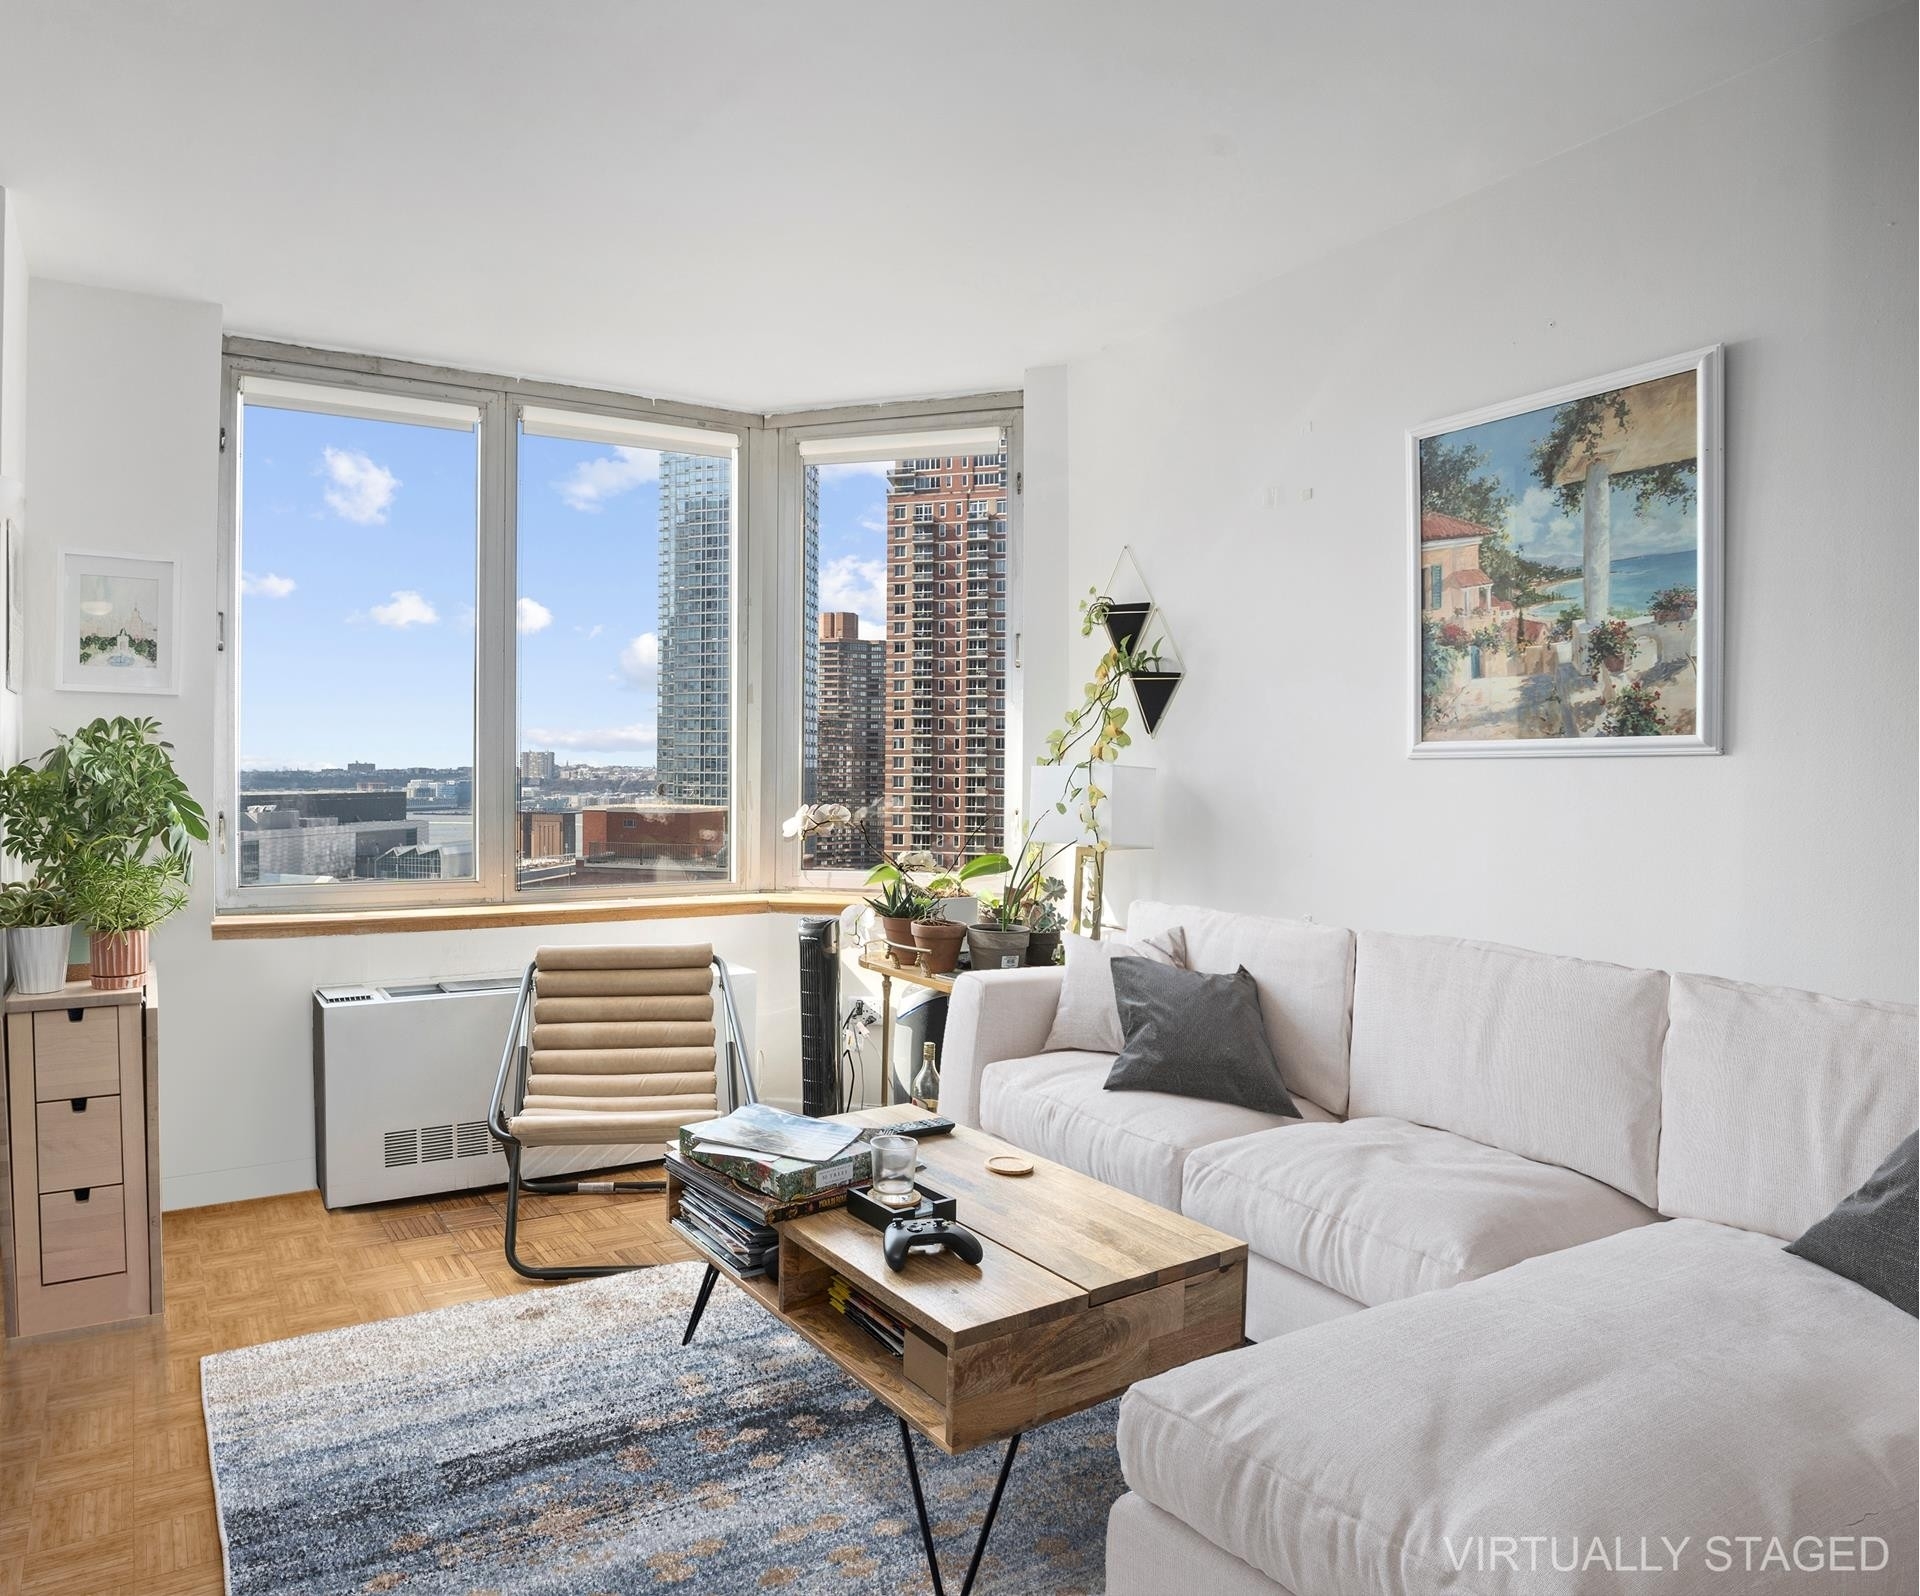 2. Condominiums for Sale at The Strand, 500 W 43RD ST, 23A Hell's Kitchen, New York, NY 10036